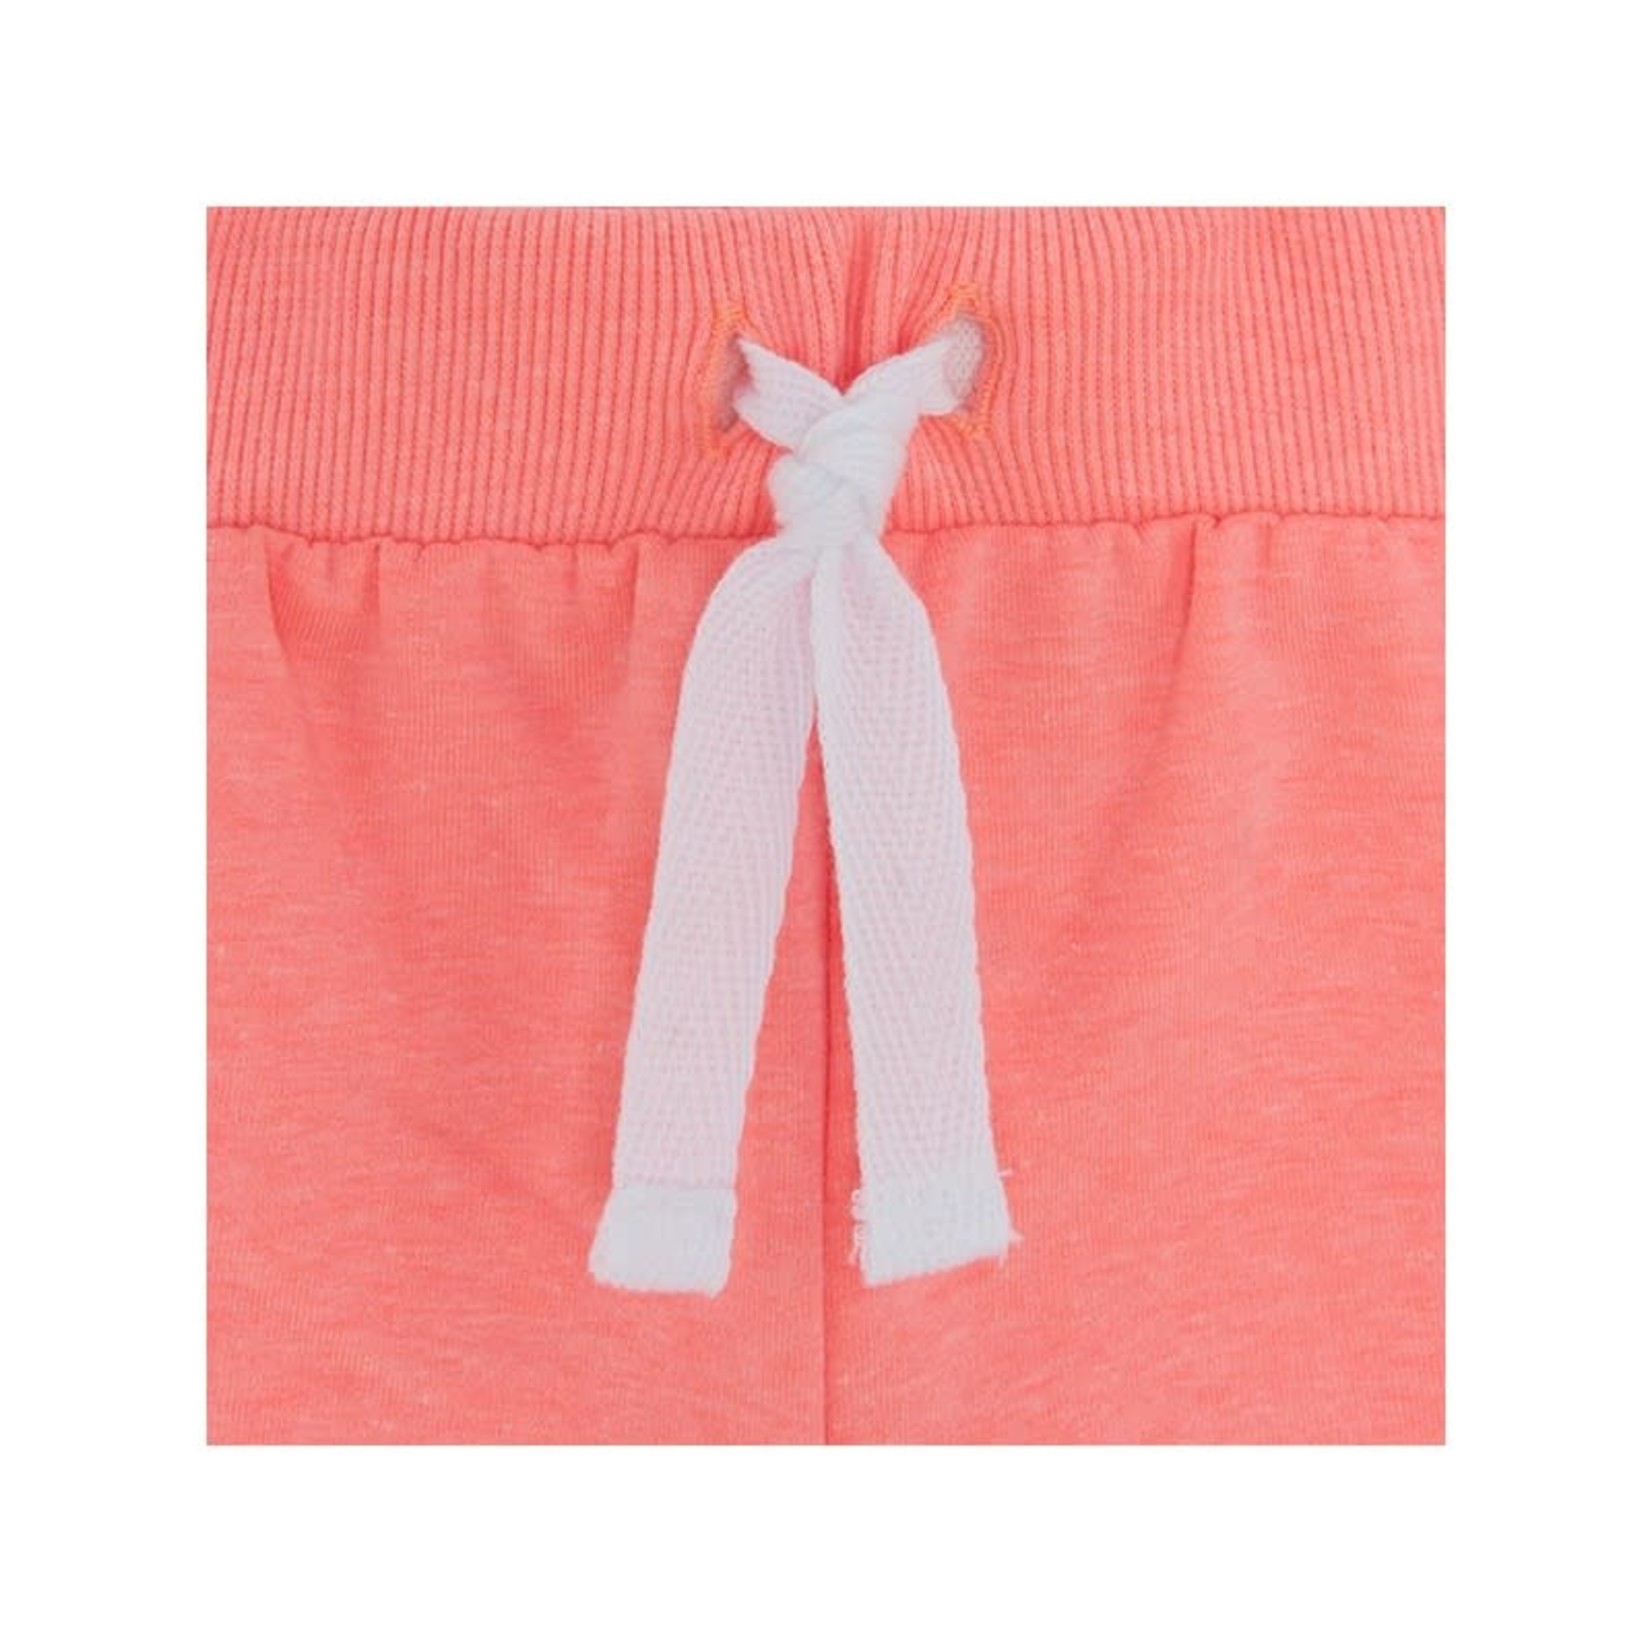 TucTuc TUC TUC - Short sportif 'NK Vitamin Summer' - Rose fluo/blanc